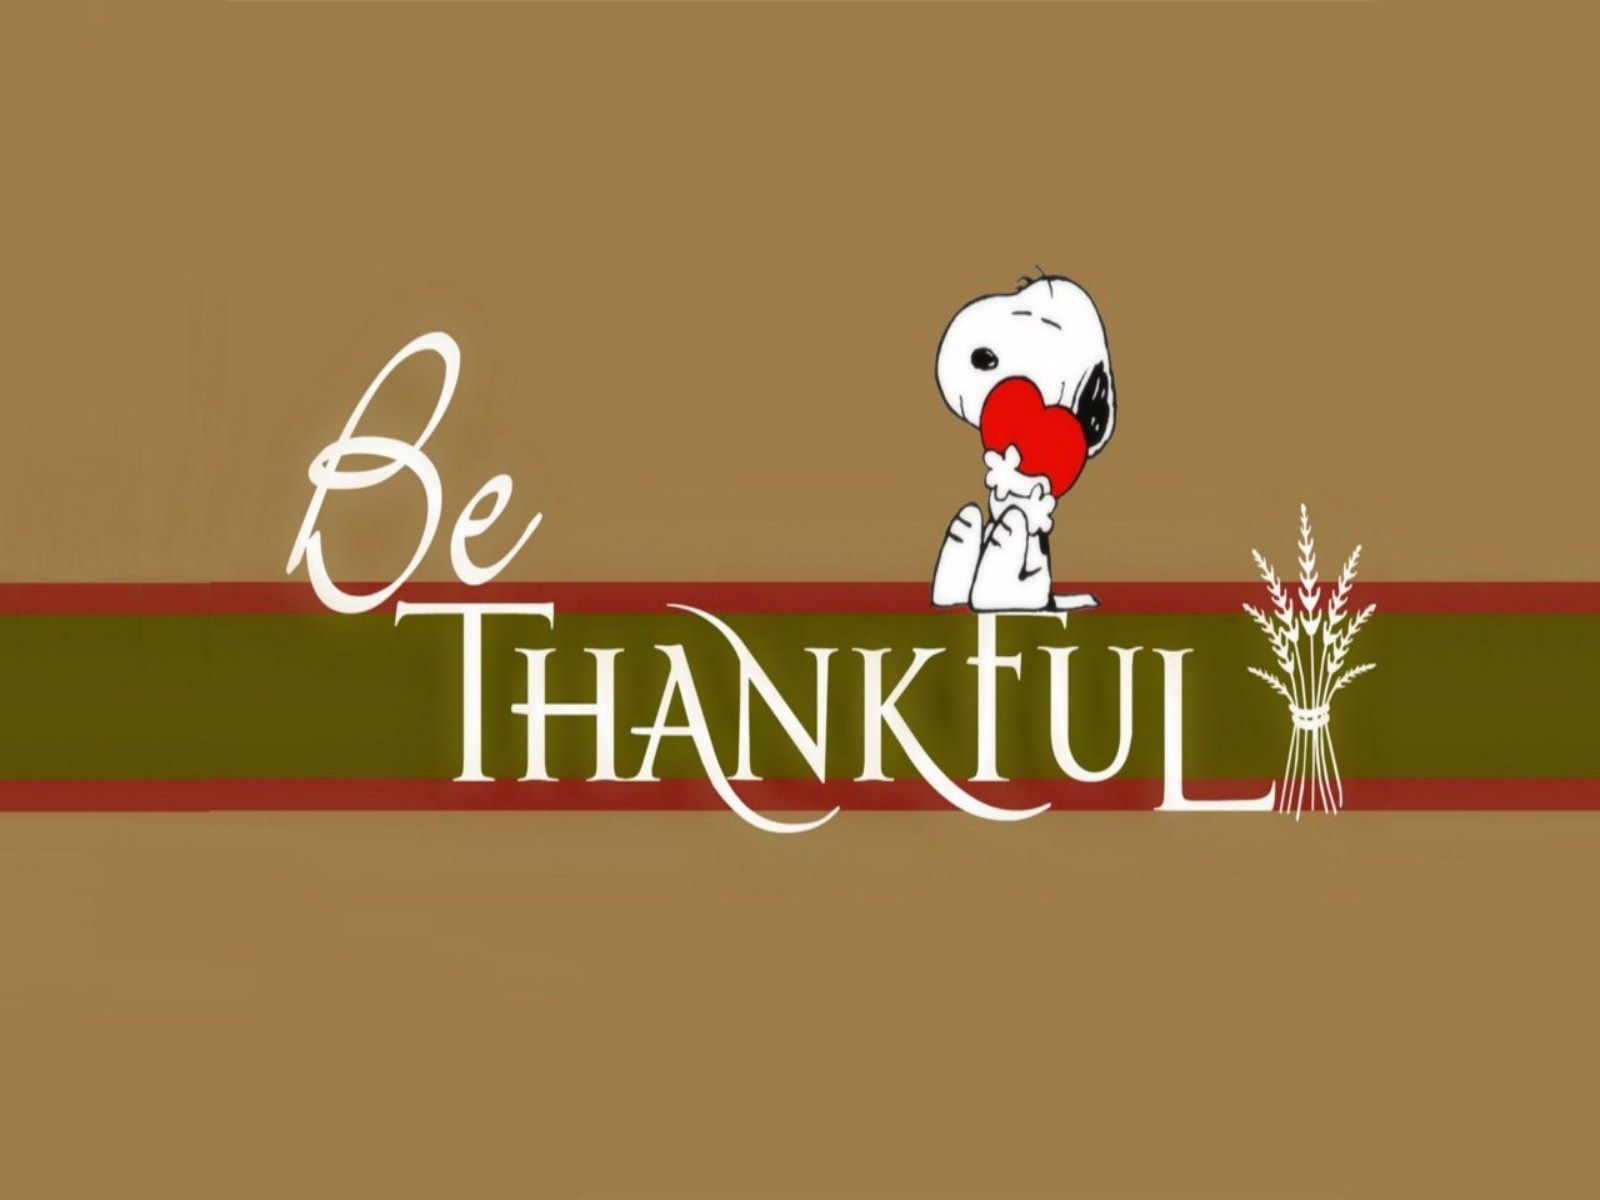 Happy Thanksgiving Image Picture, Wallpaper, Photo, Pics for Facebook